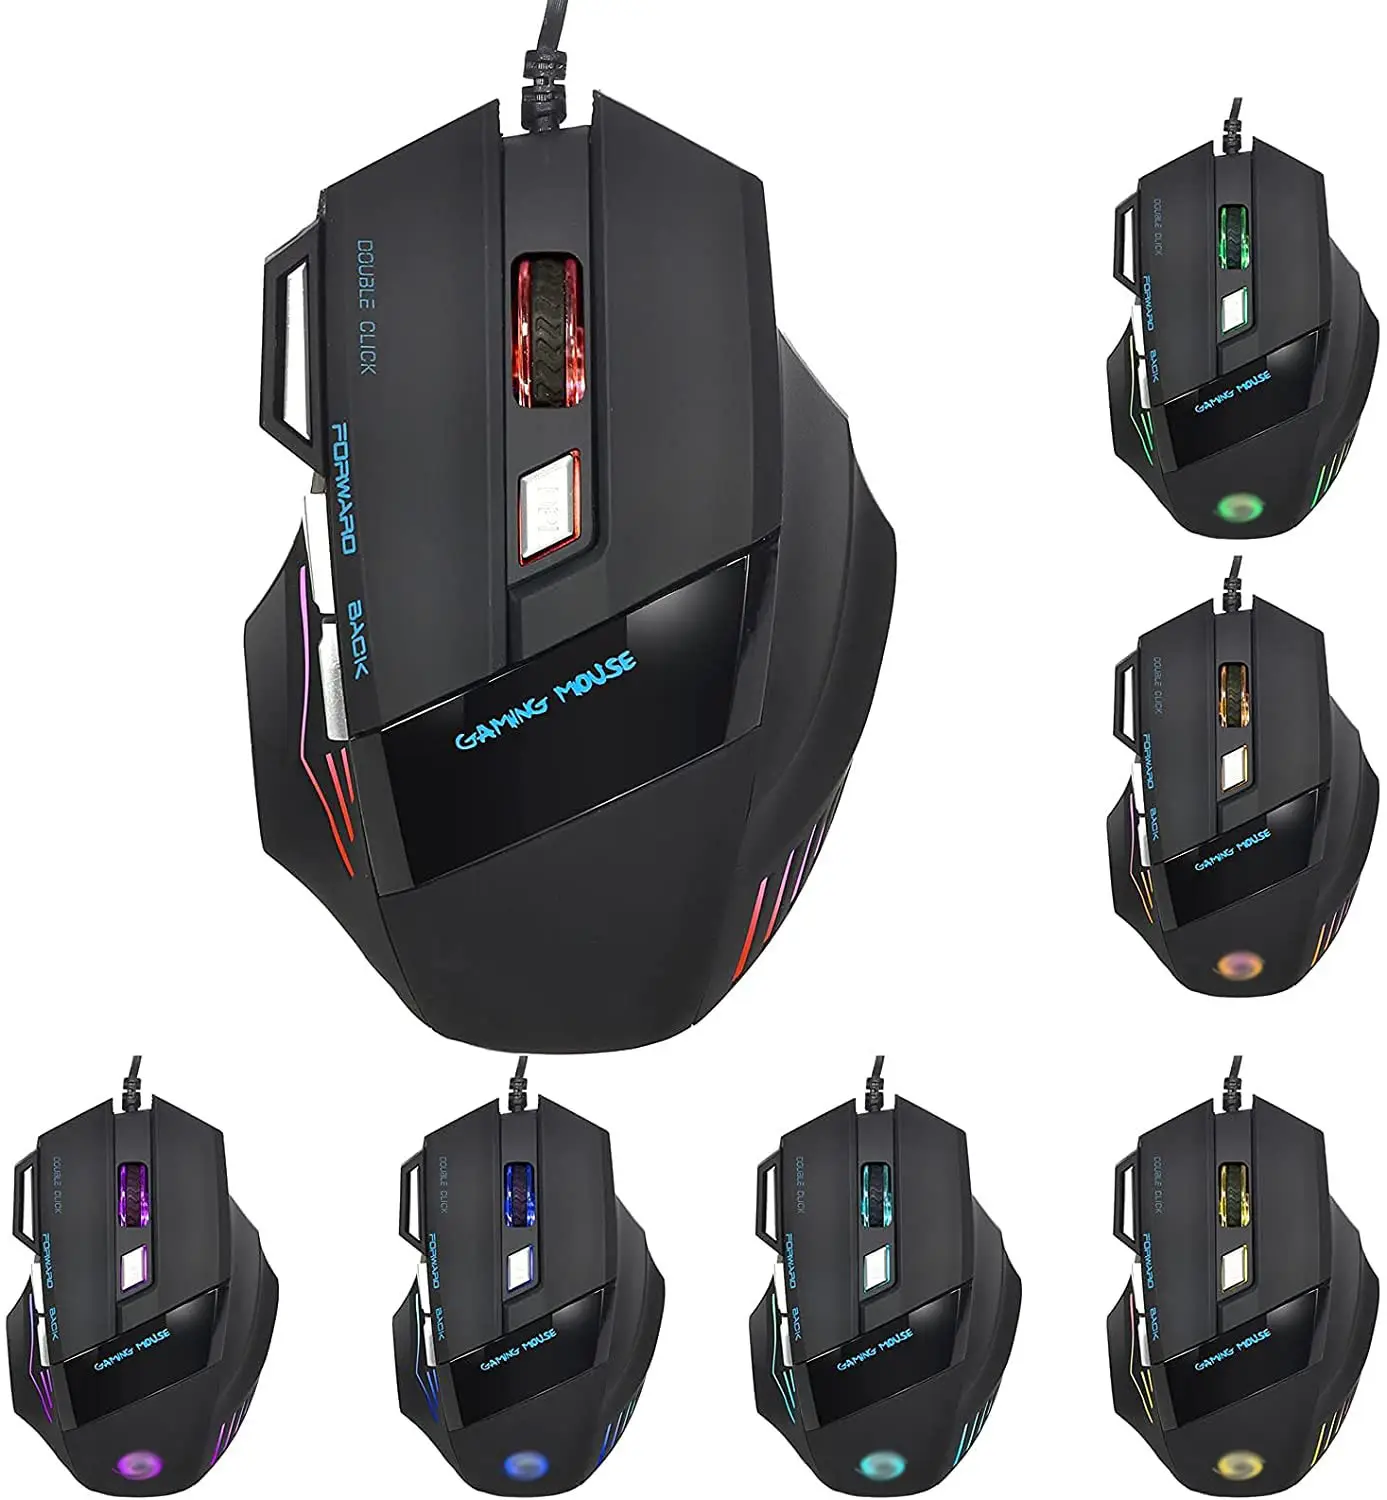 OEM Honeycomb Vertical Mouse Gaming Mouse Jogo Do Rato Raton De Juego Raton Inalambrico Gamer Wireless Rgb Gaming Mouse Game